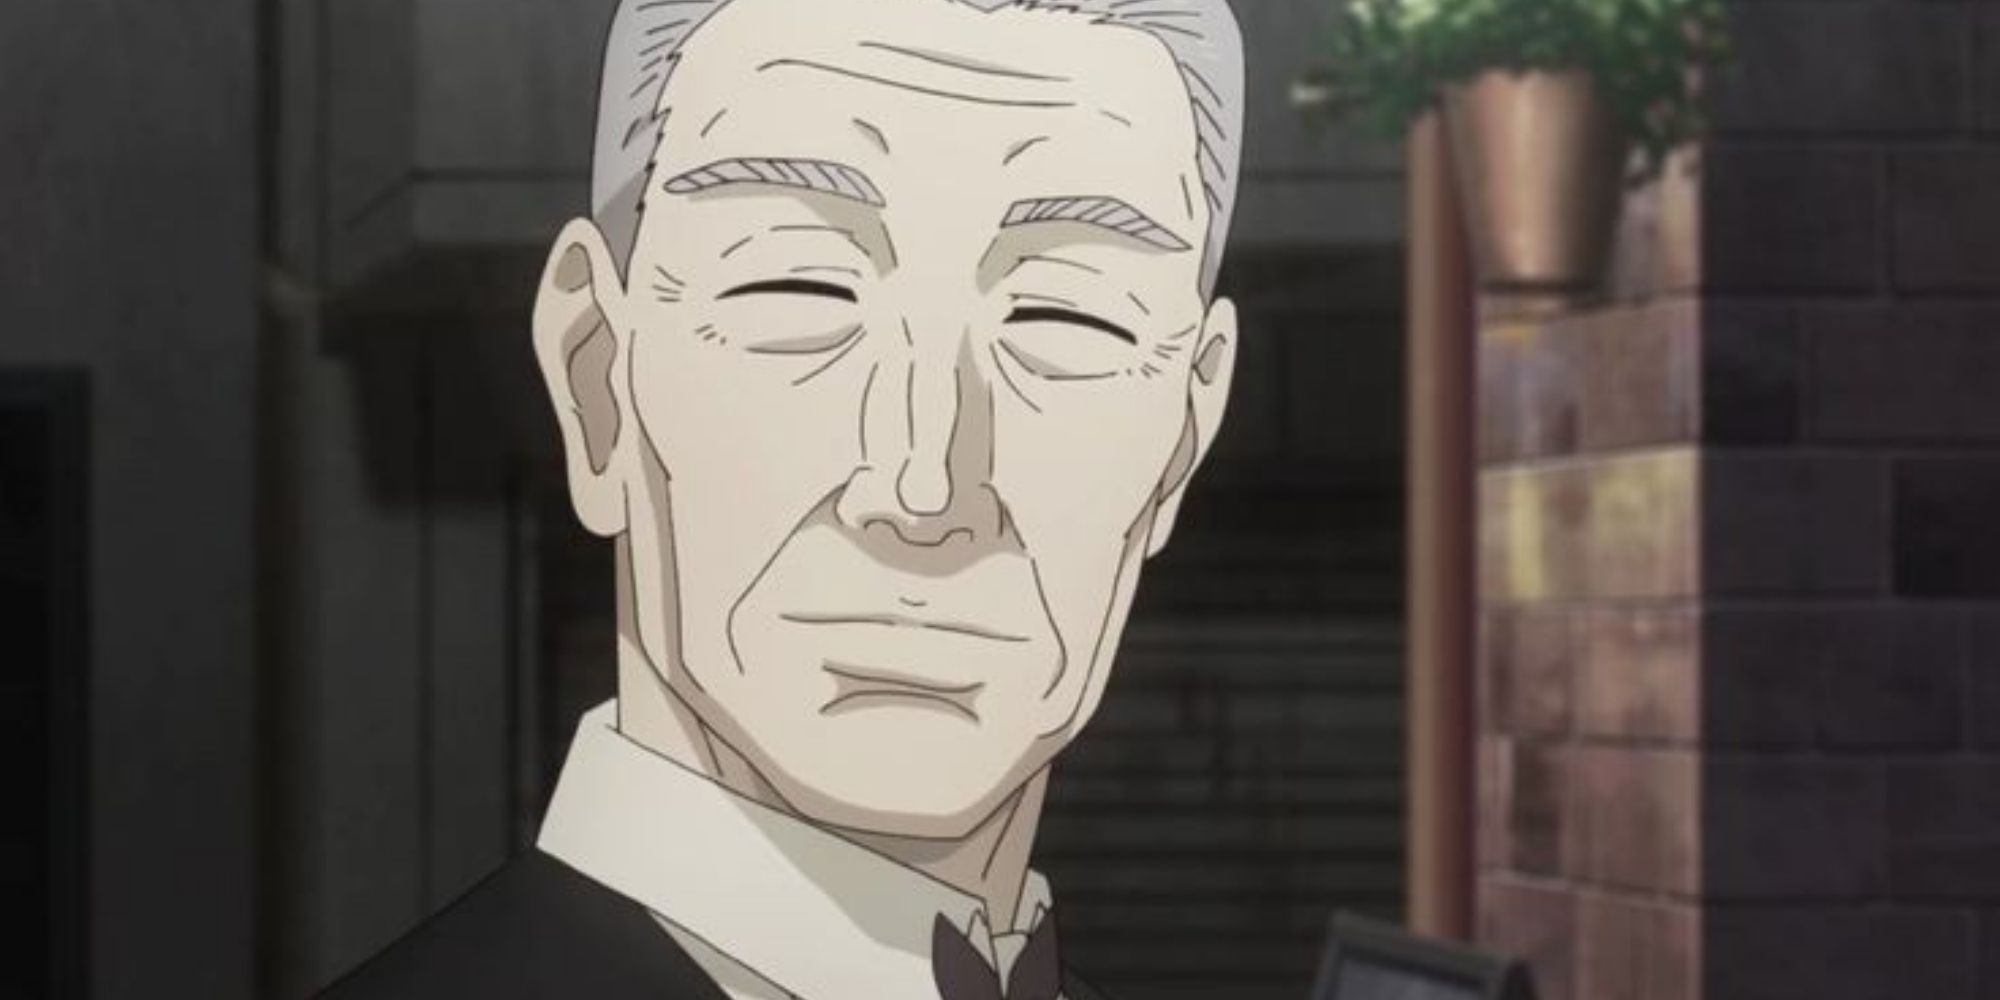 Yoshimura, an old man standing out side his coffee shop in Tokyo Ghoul.